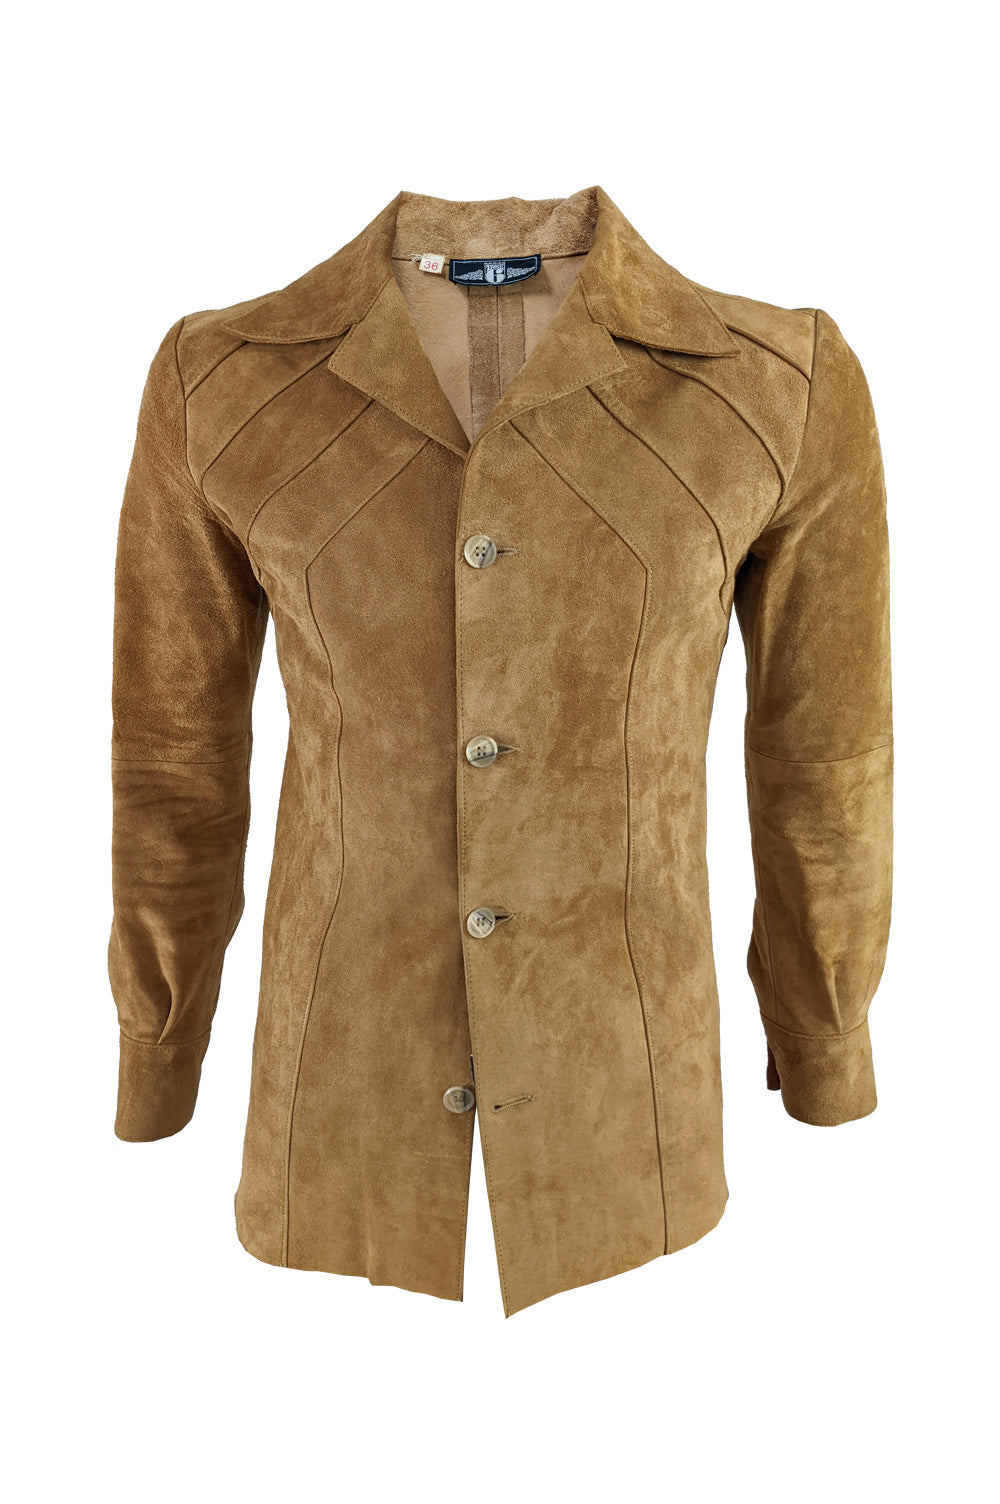 Take 6 of Carnaby St Vintage Mens Suede Jacket, 1960s